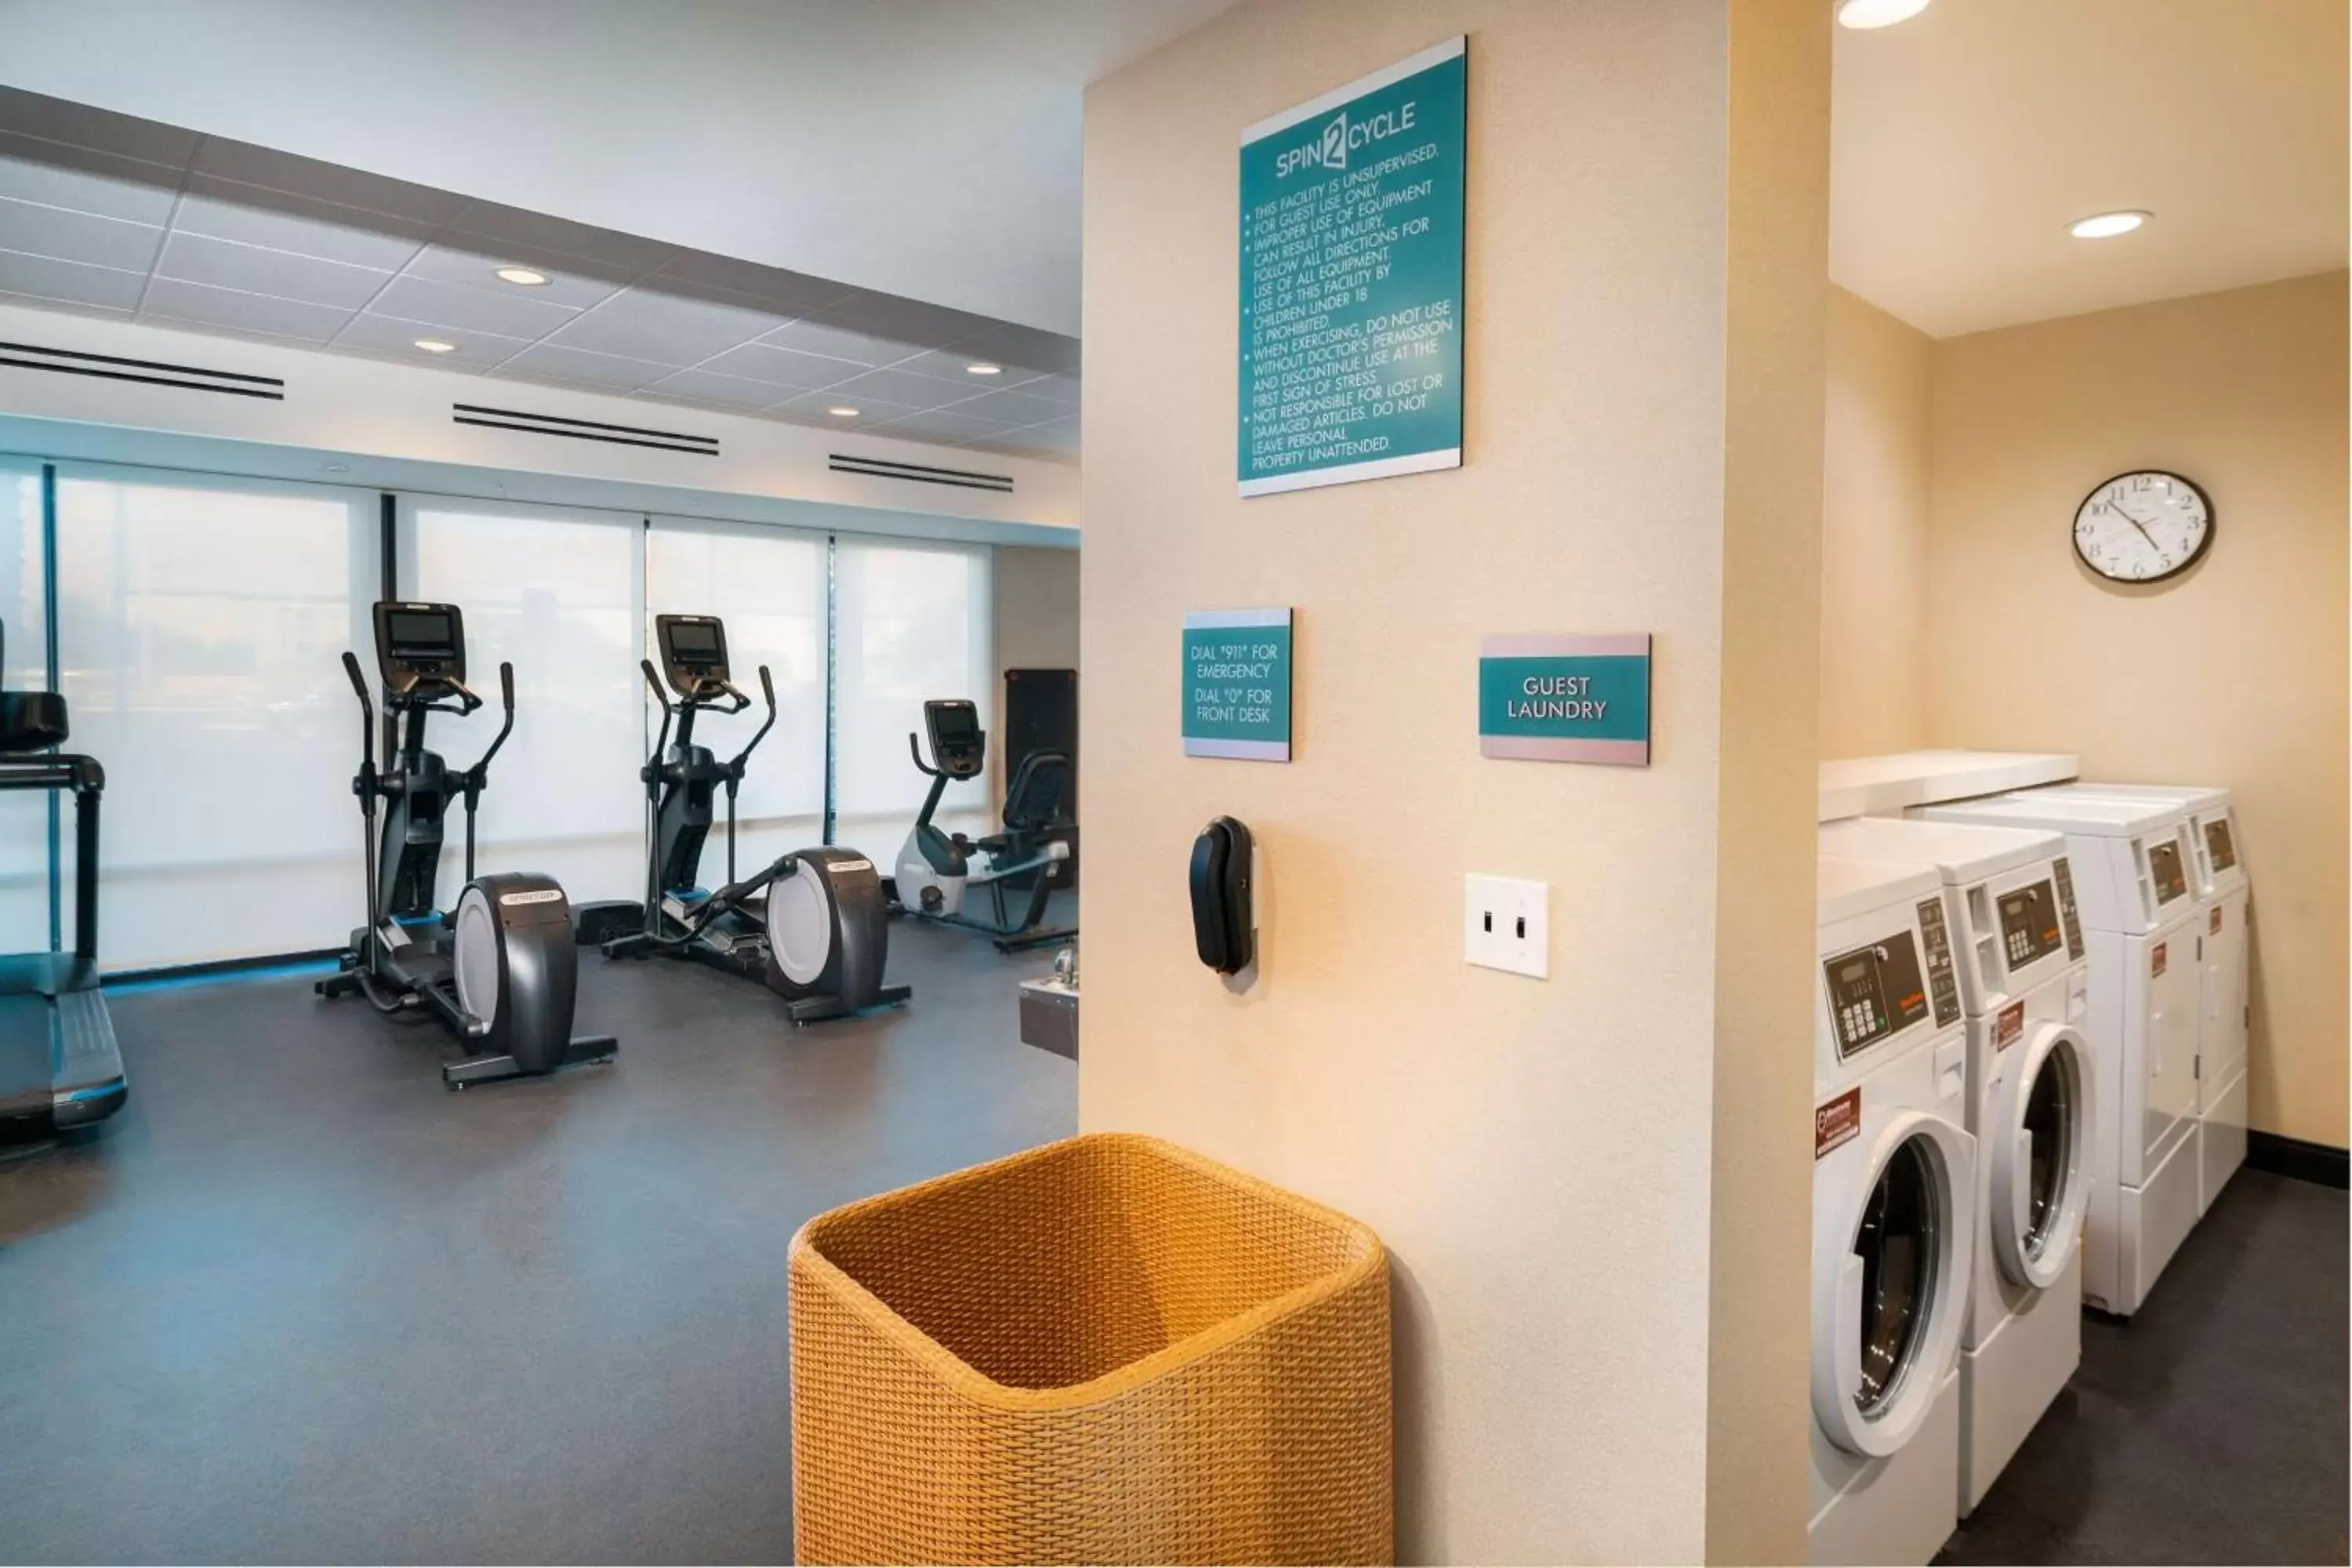 Fitness centre/facilities, Fitness Center/Facilities in Home2 Suites Corona, Ca